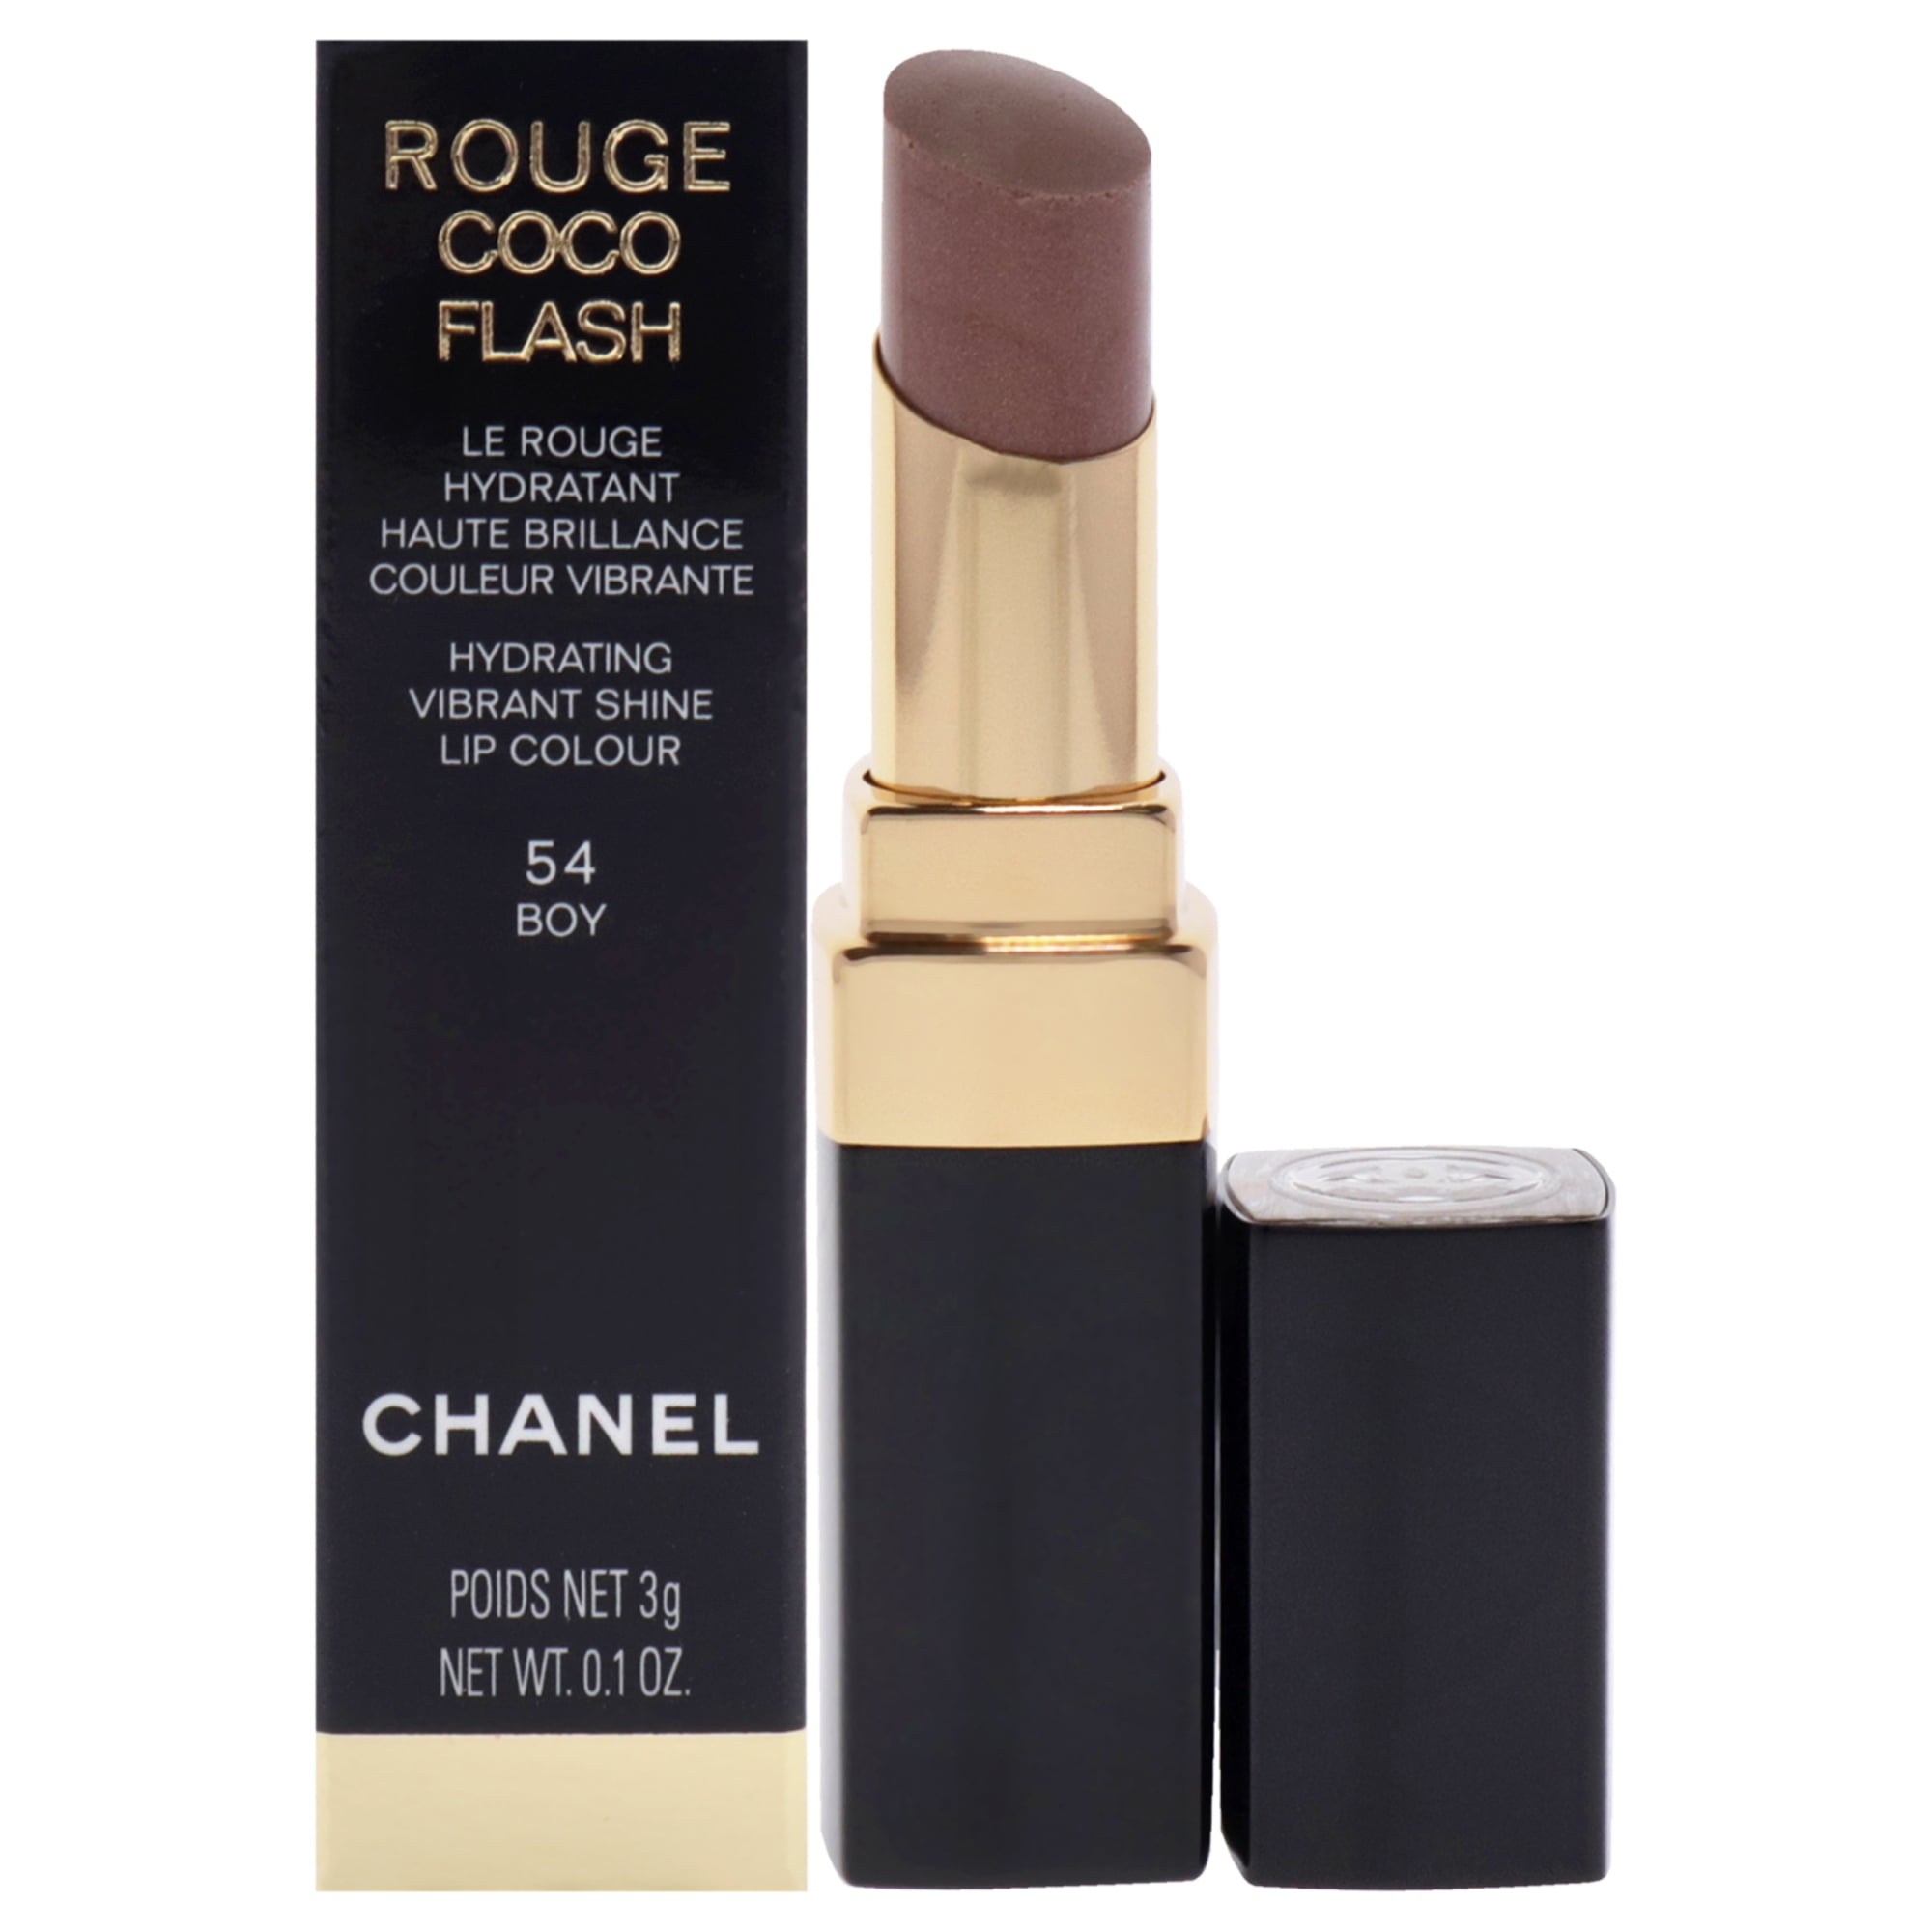 CHANEL+Rouge+Coco+Flash+Lipstick+in+54+Boy+3g for sale online